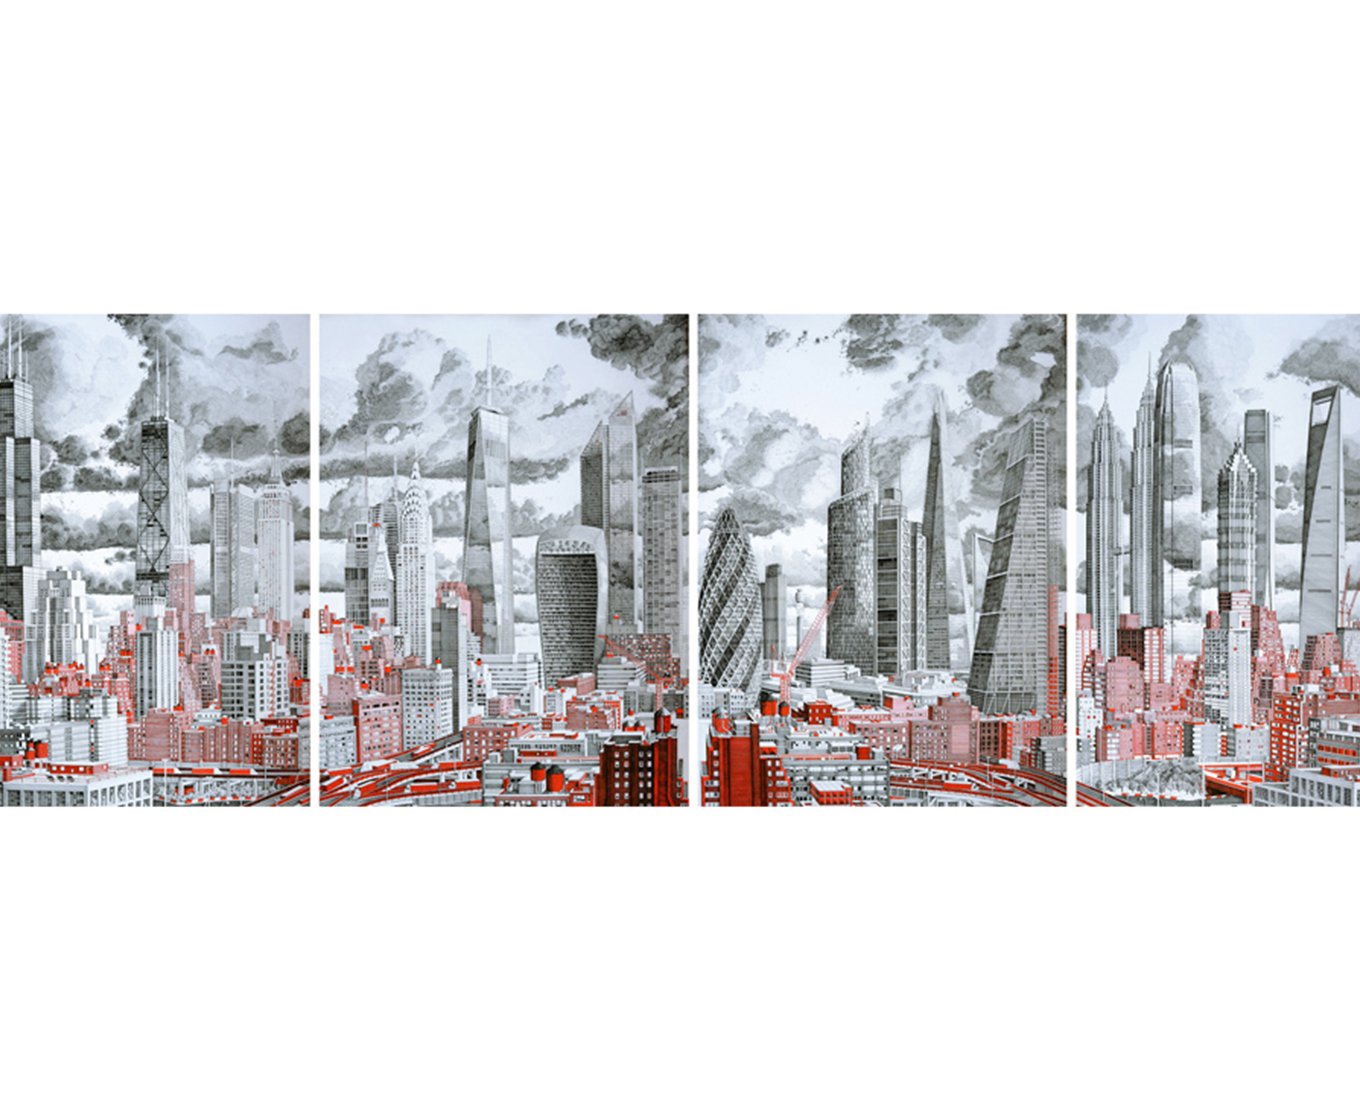 A sketch of a city skyline and clouds in four panels.